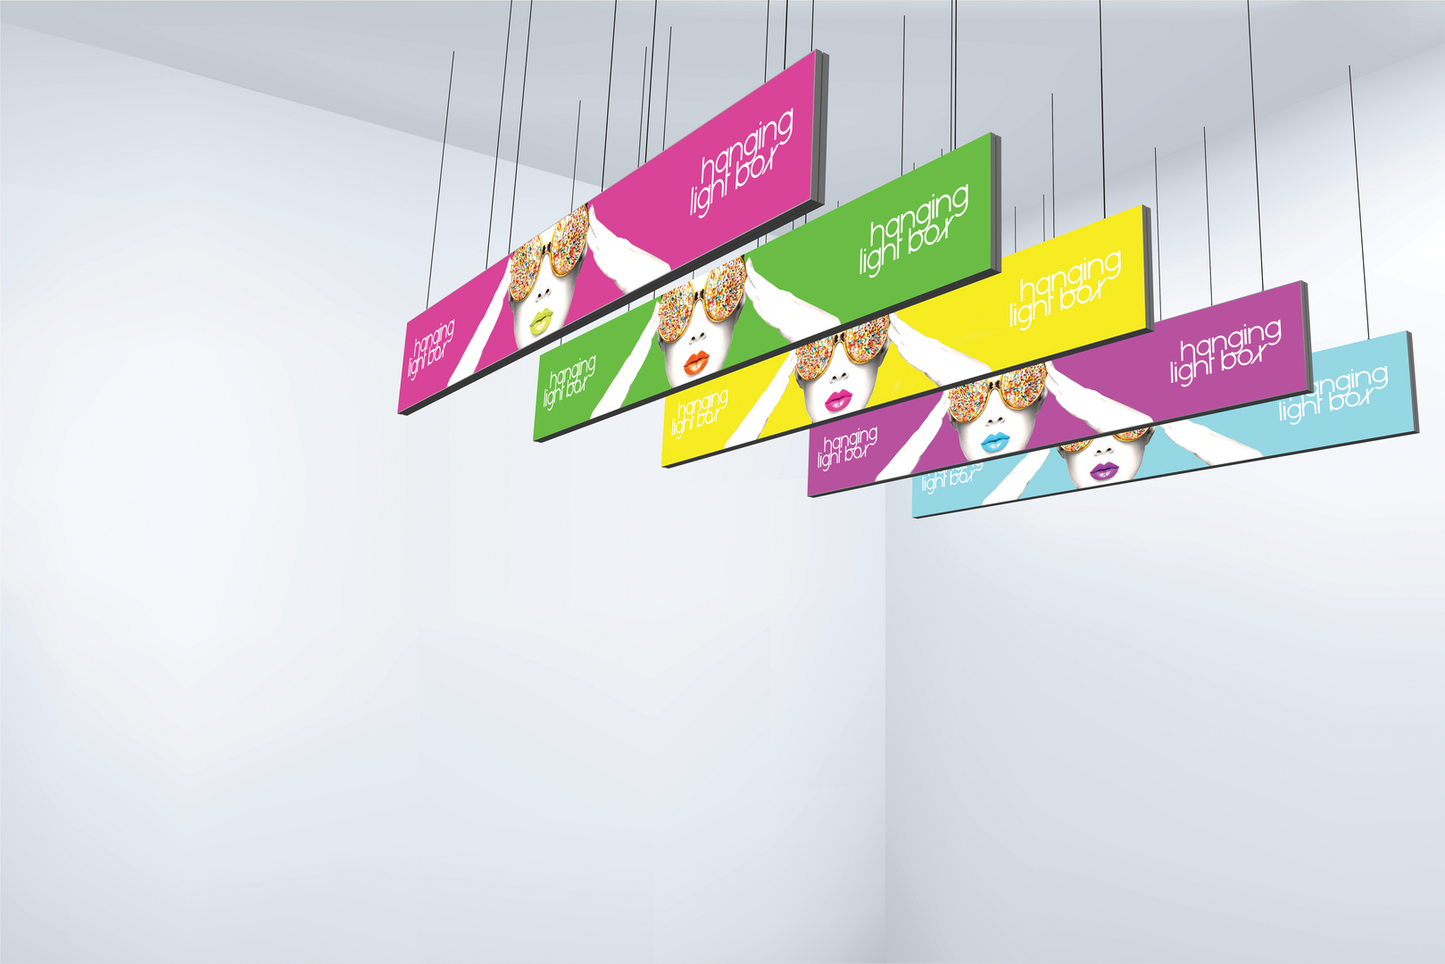 30ft x 3ft Vector Frame Hanging Light Box Double-Sided (Graphic Package)